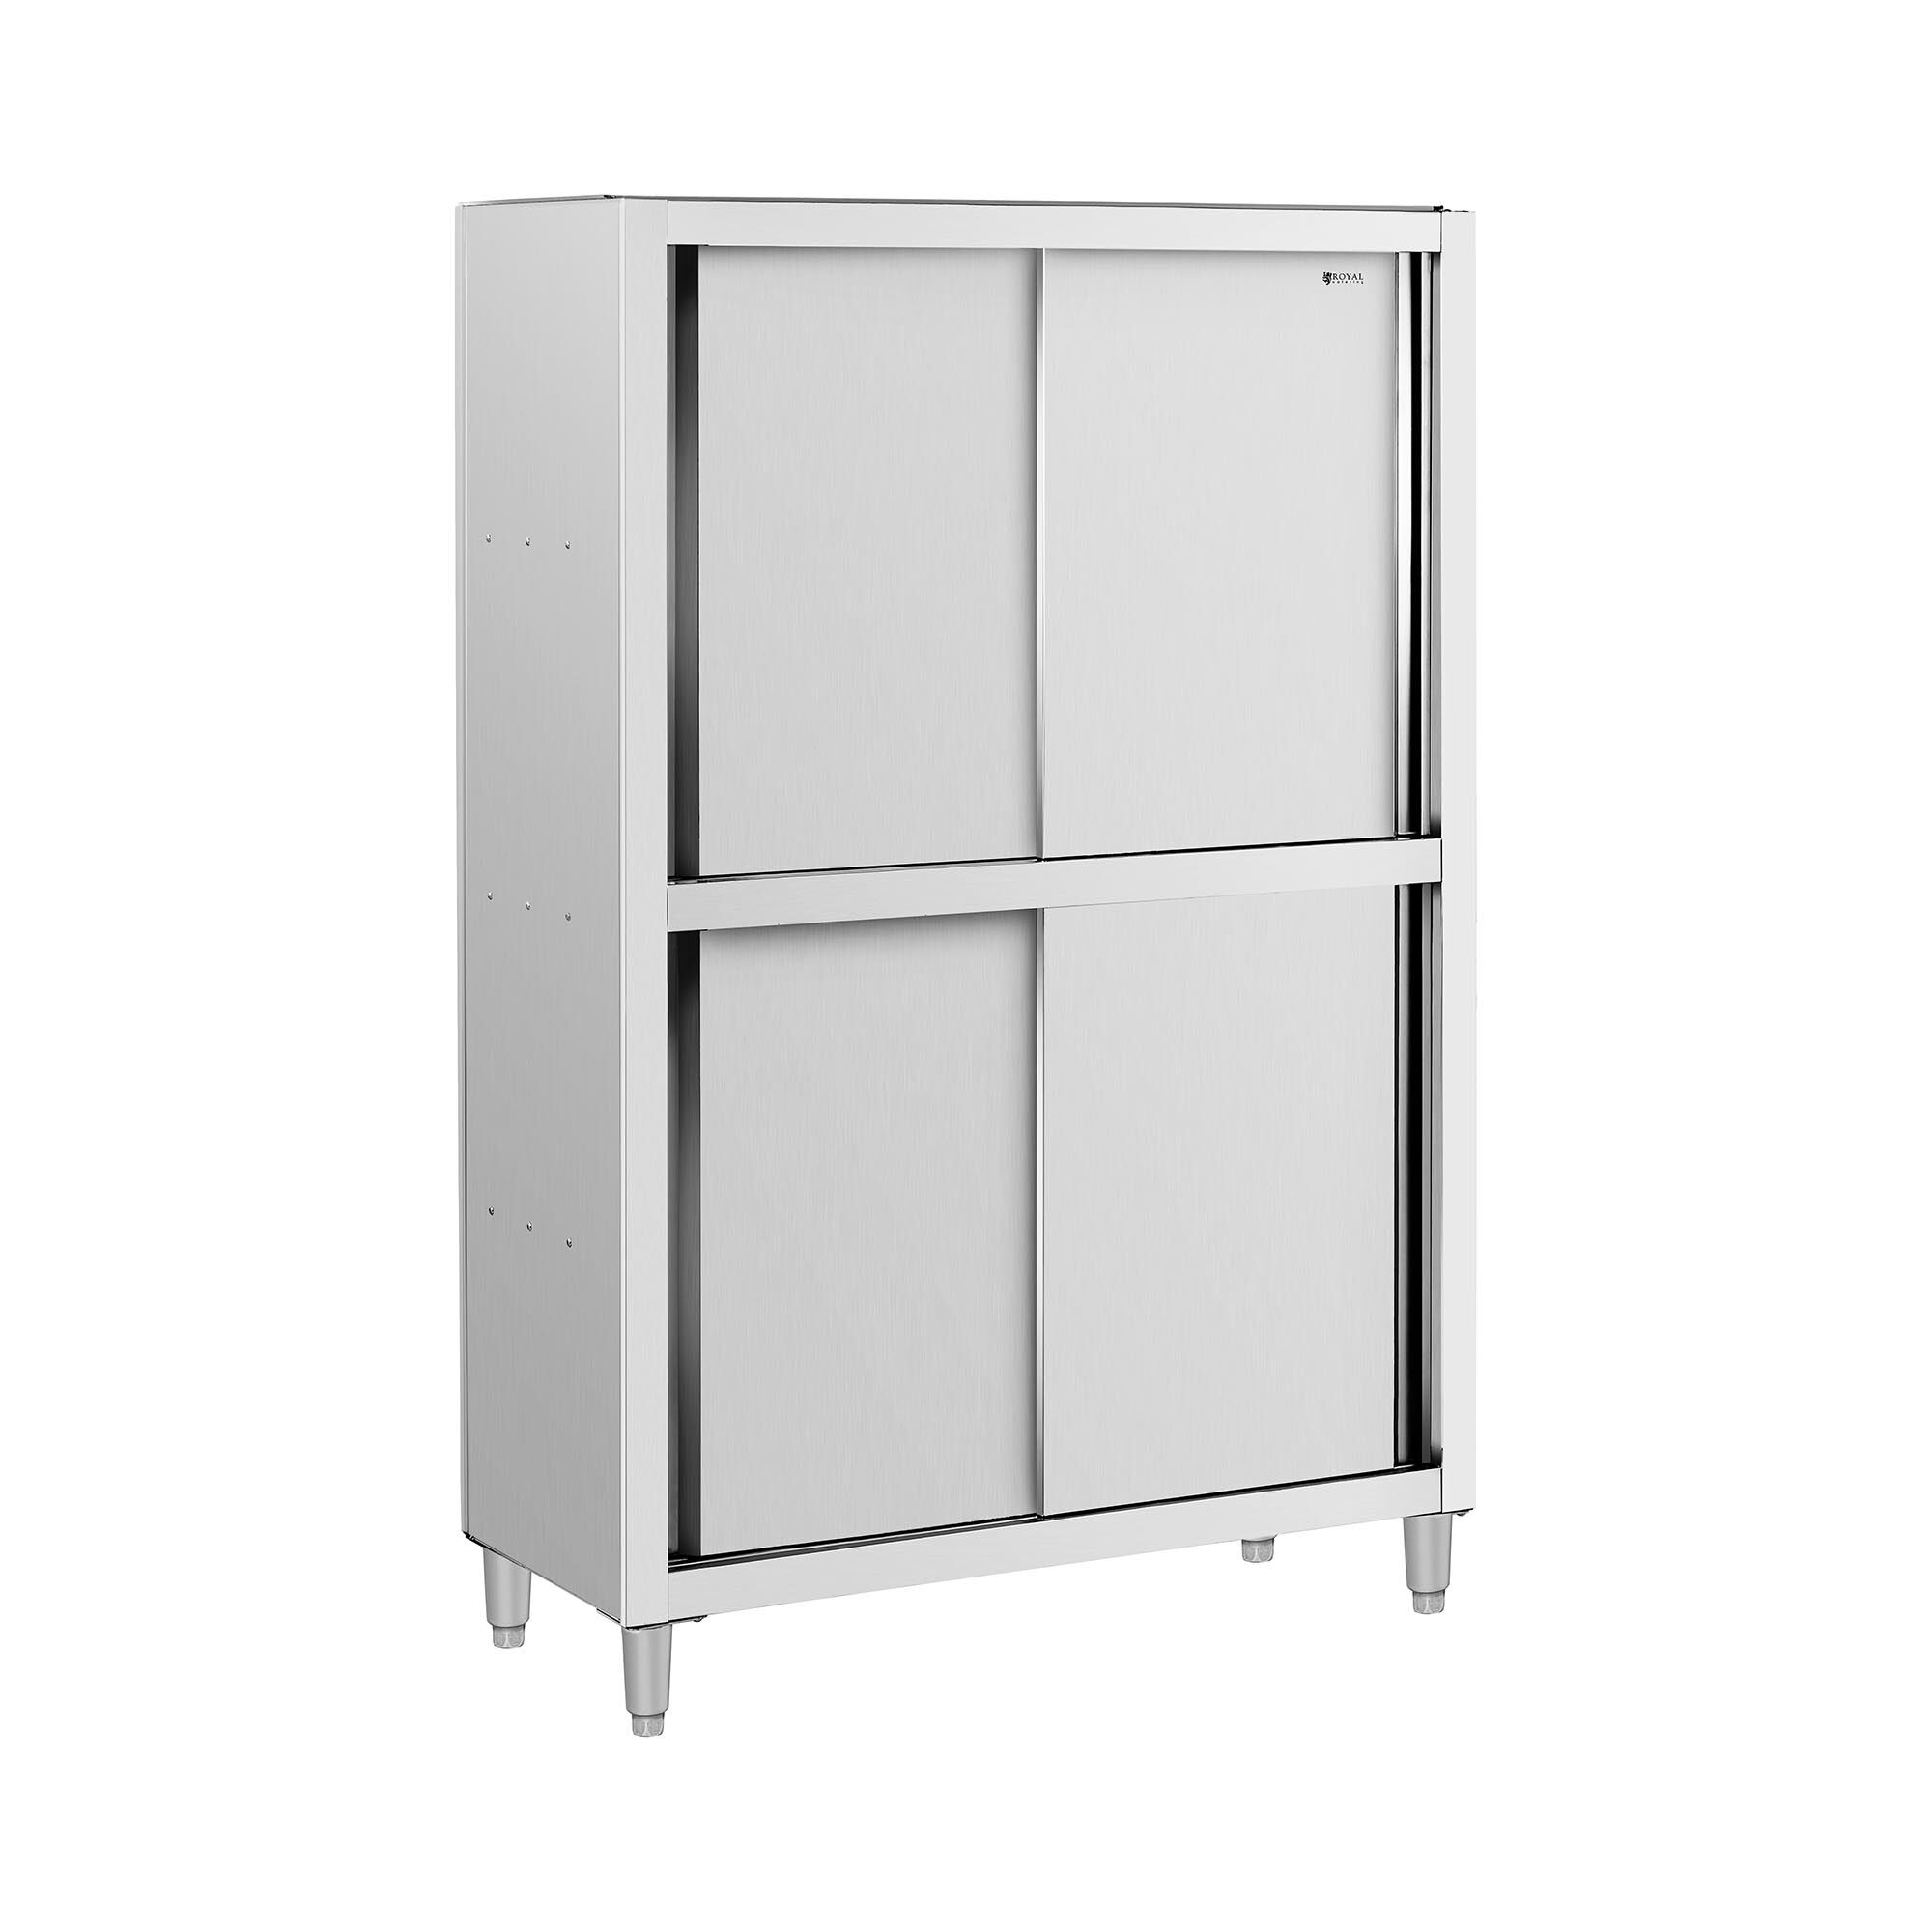 Royal Catering Armoire inox - 1 200 x 500 x 1 800 mm - Royal Catering RCDC-120